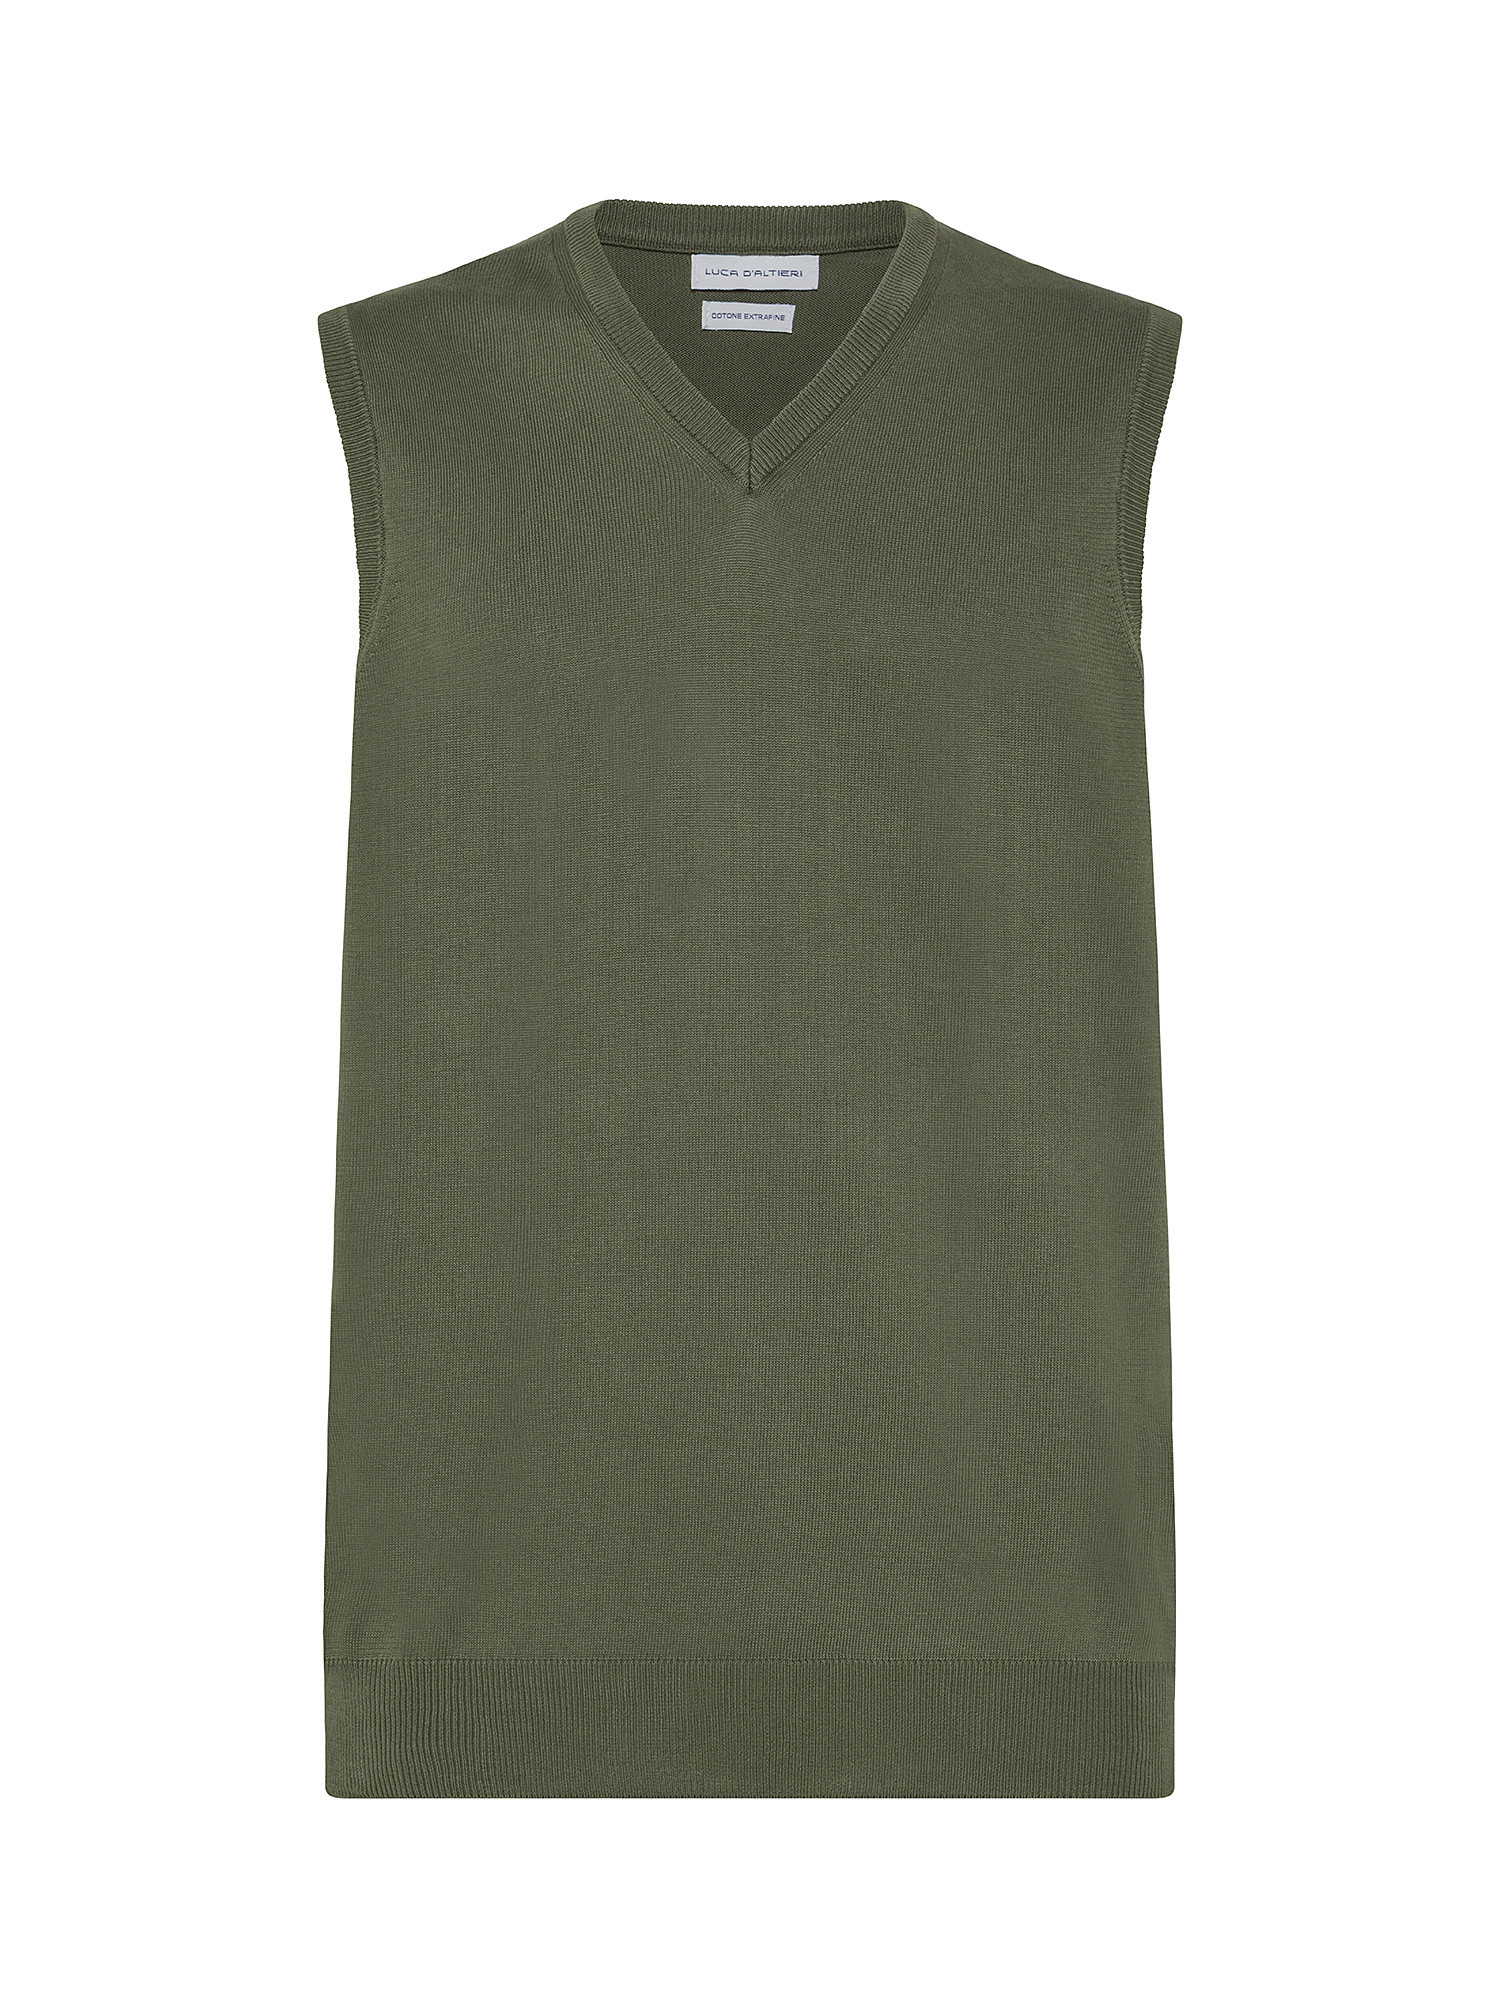 Luca D'Altieri - Extrafine cotton waistcoat, Olive Green, large image number 0